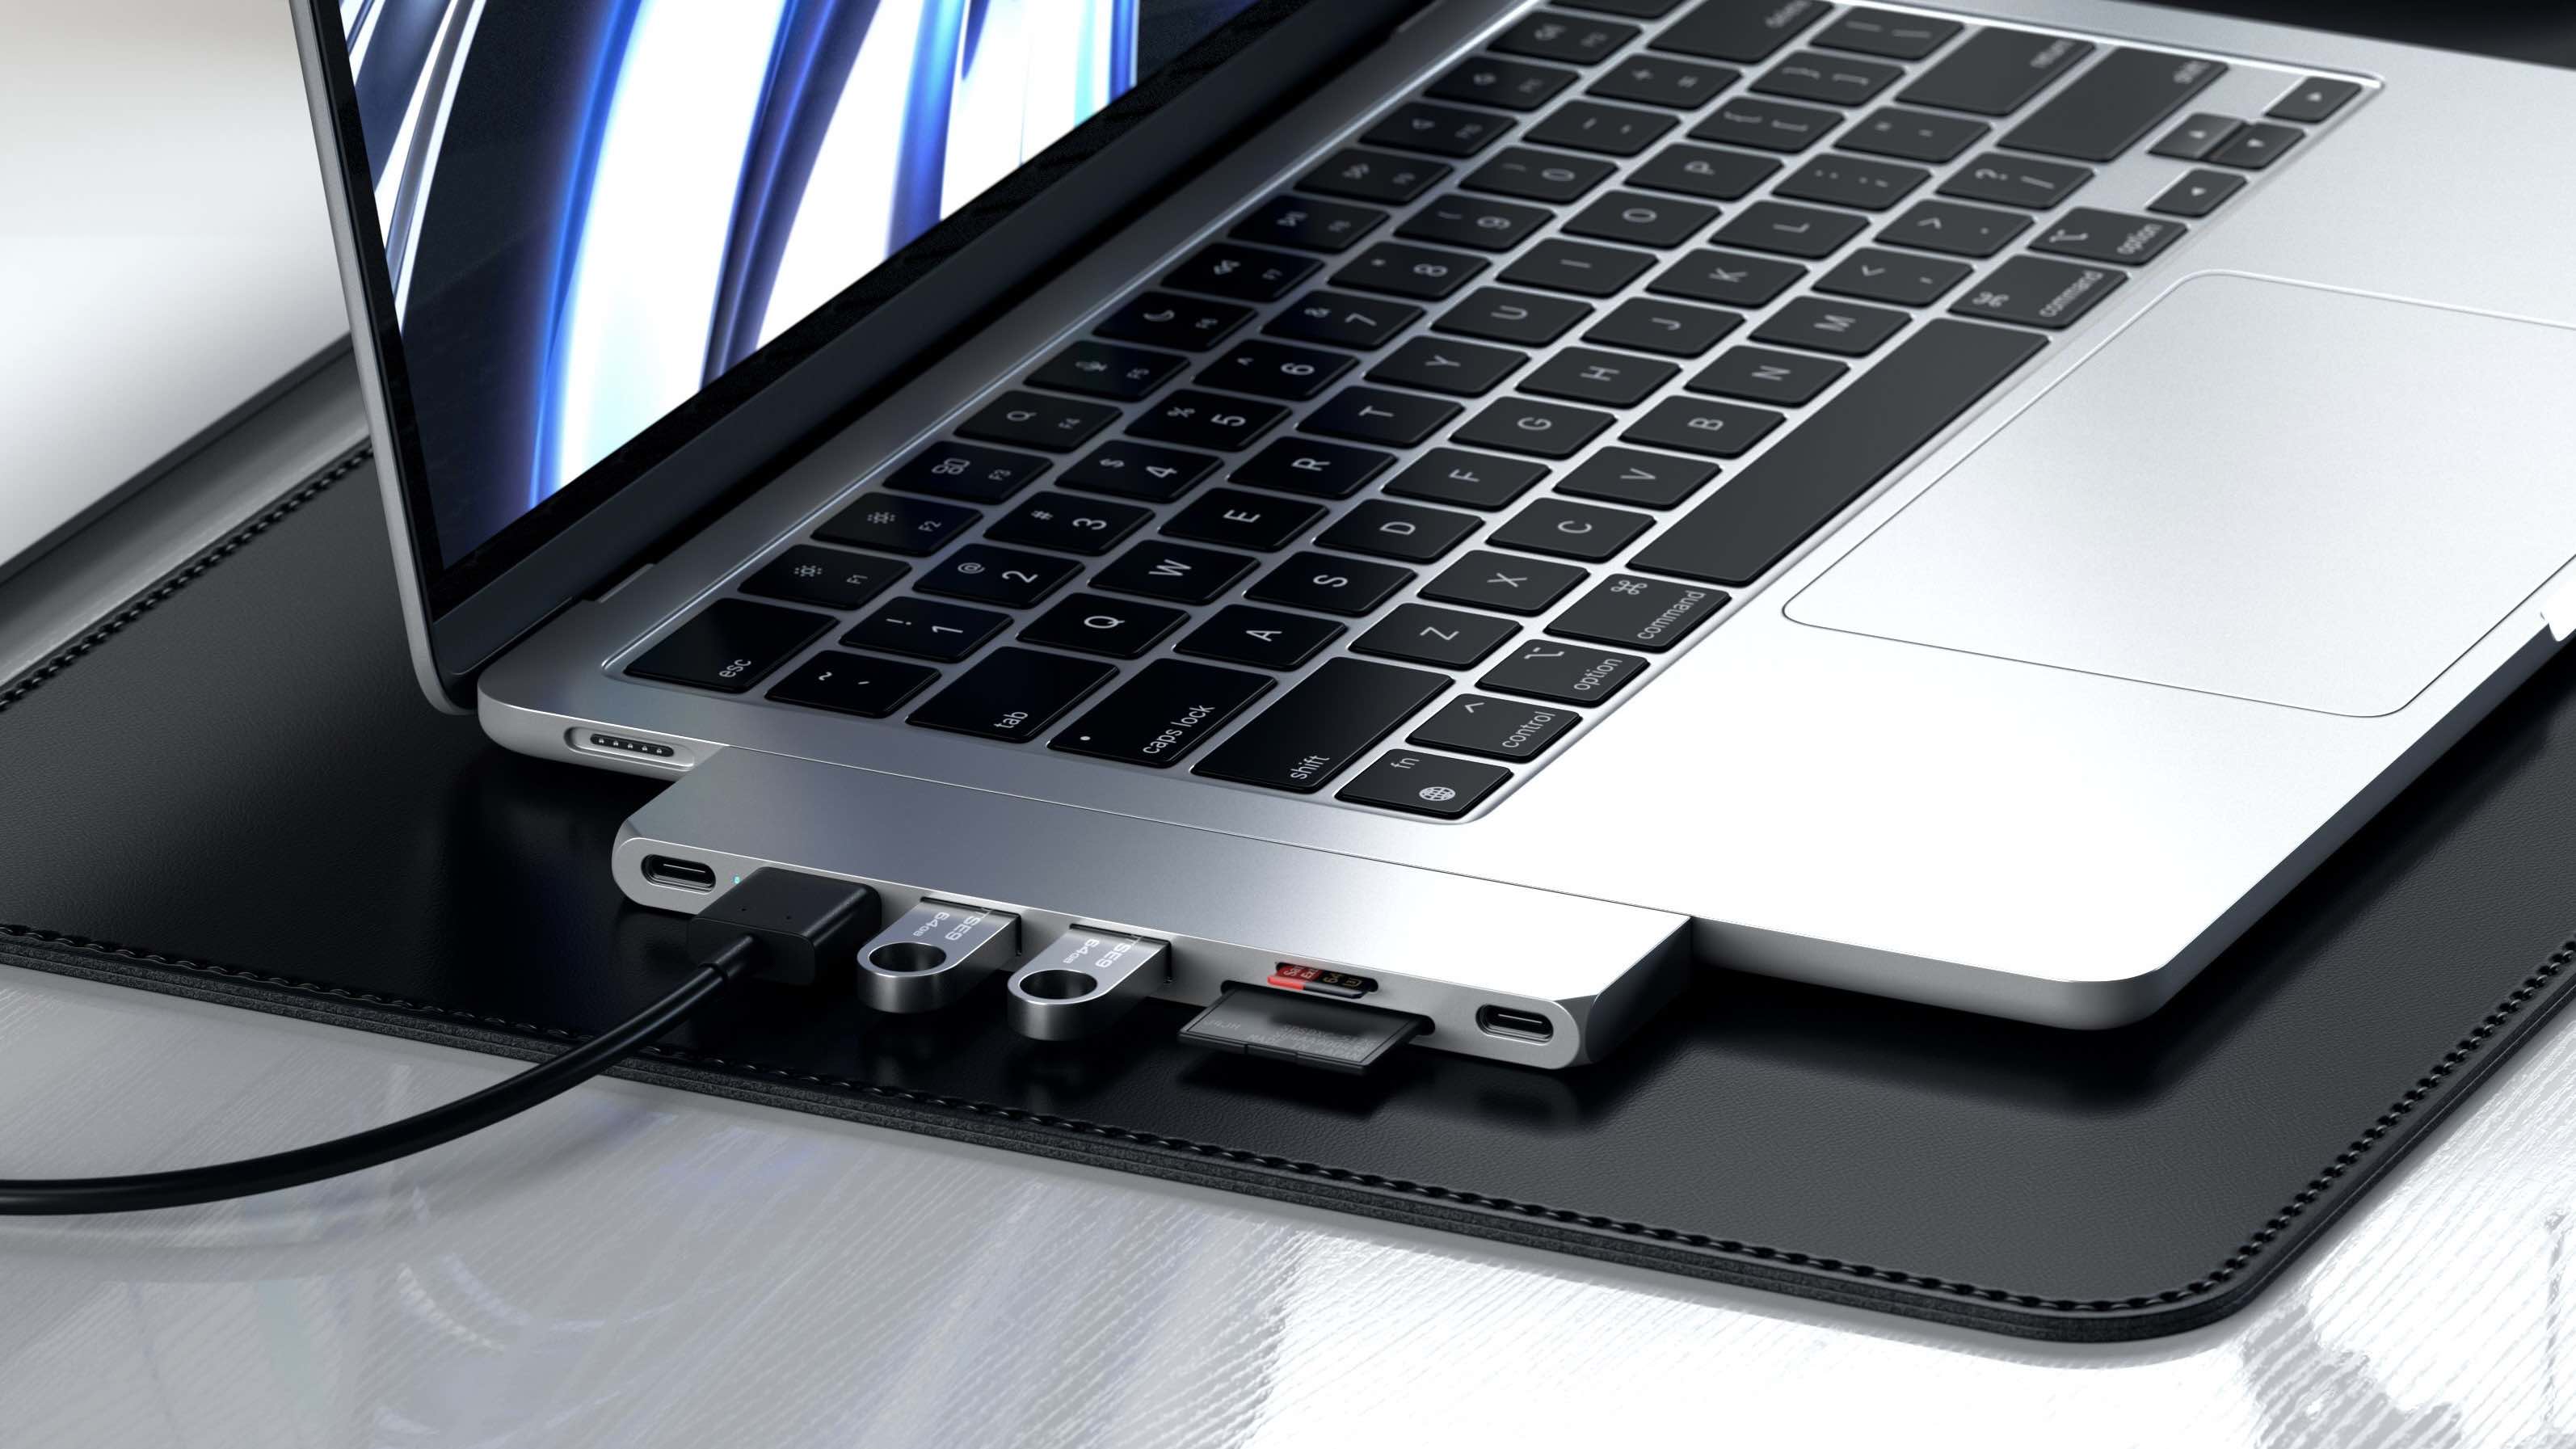 This Full-Featured Hub Is Made For Apple's Latest MacBook Pros